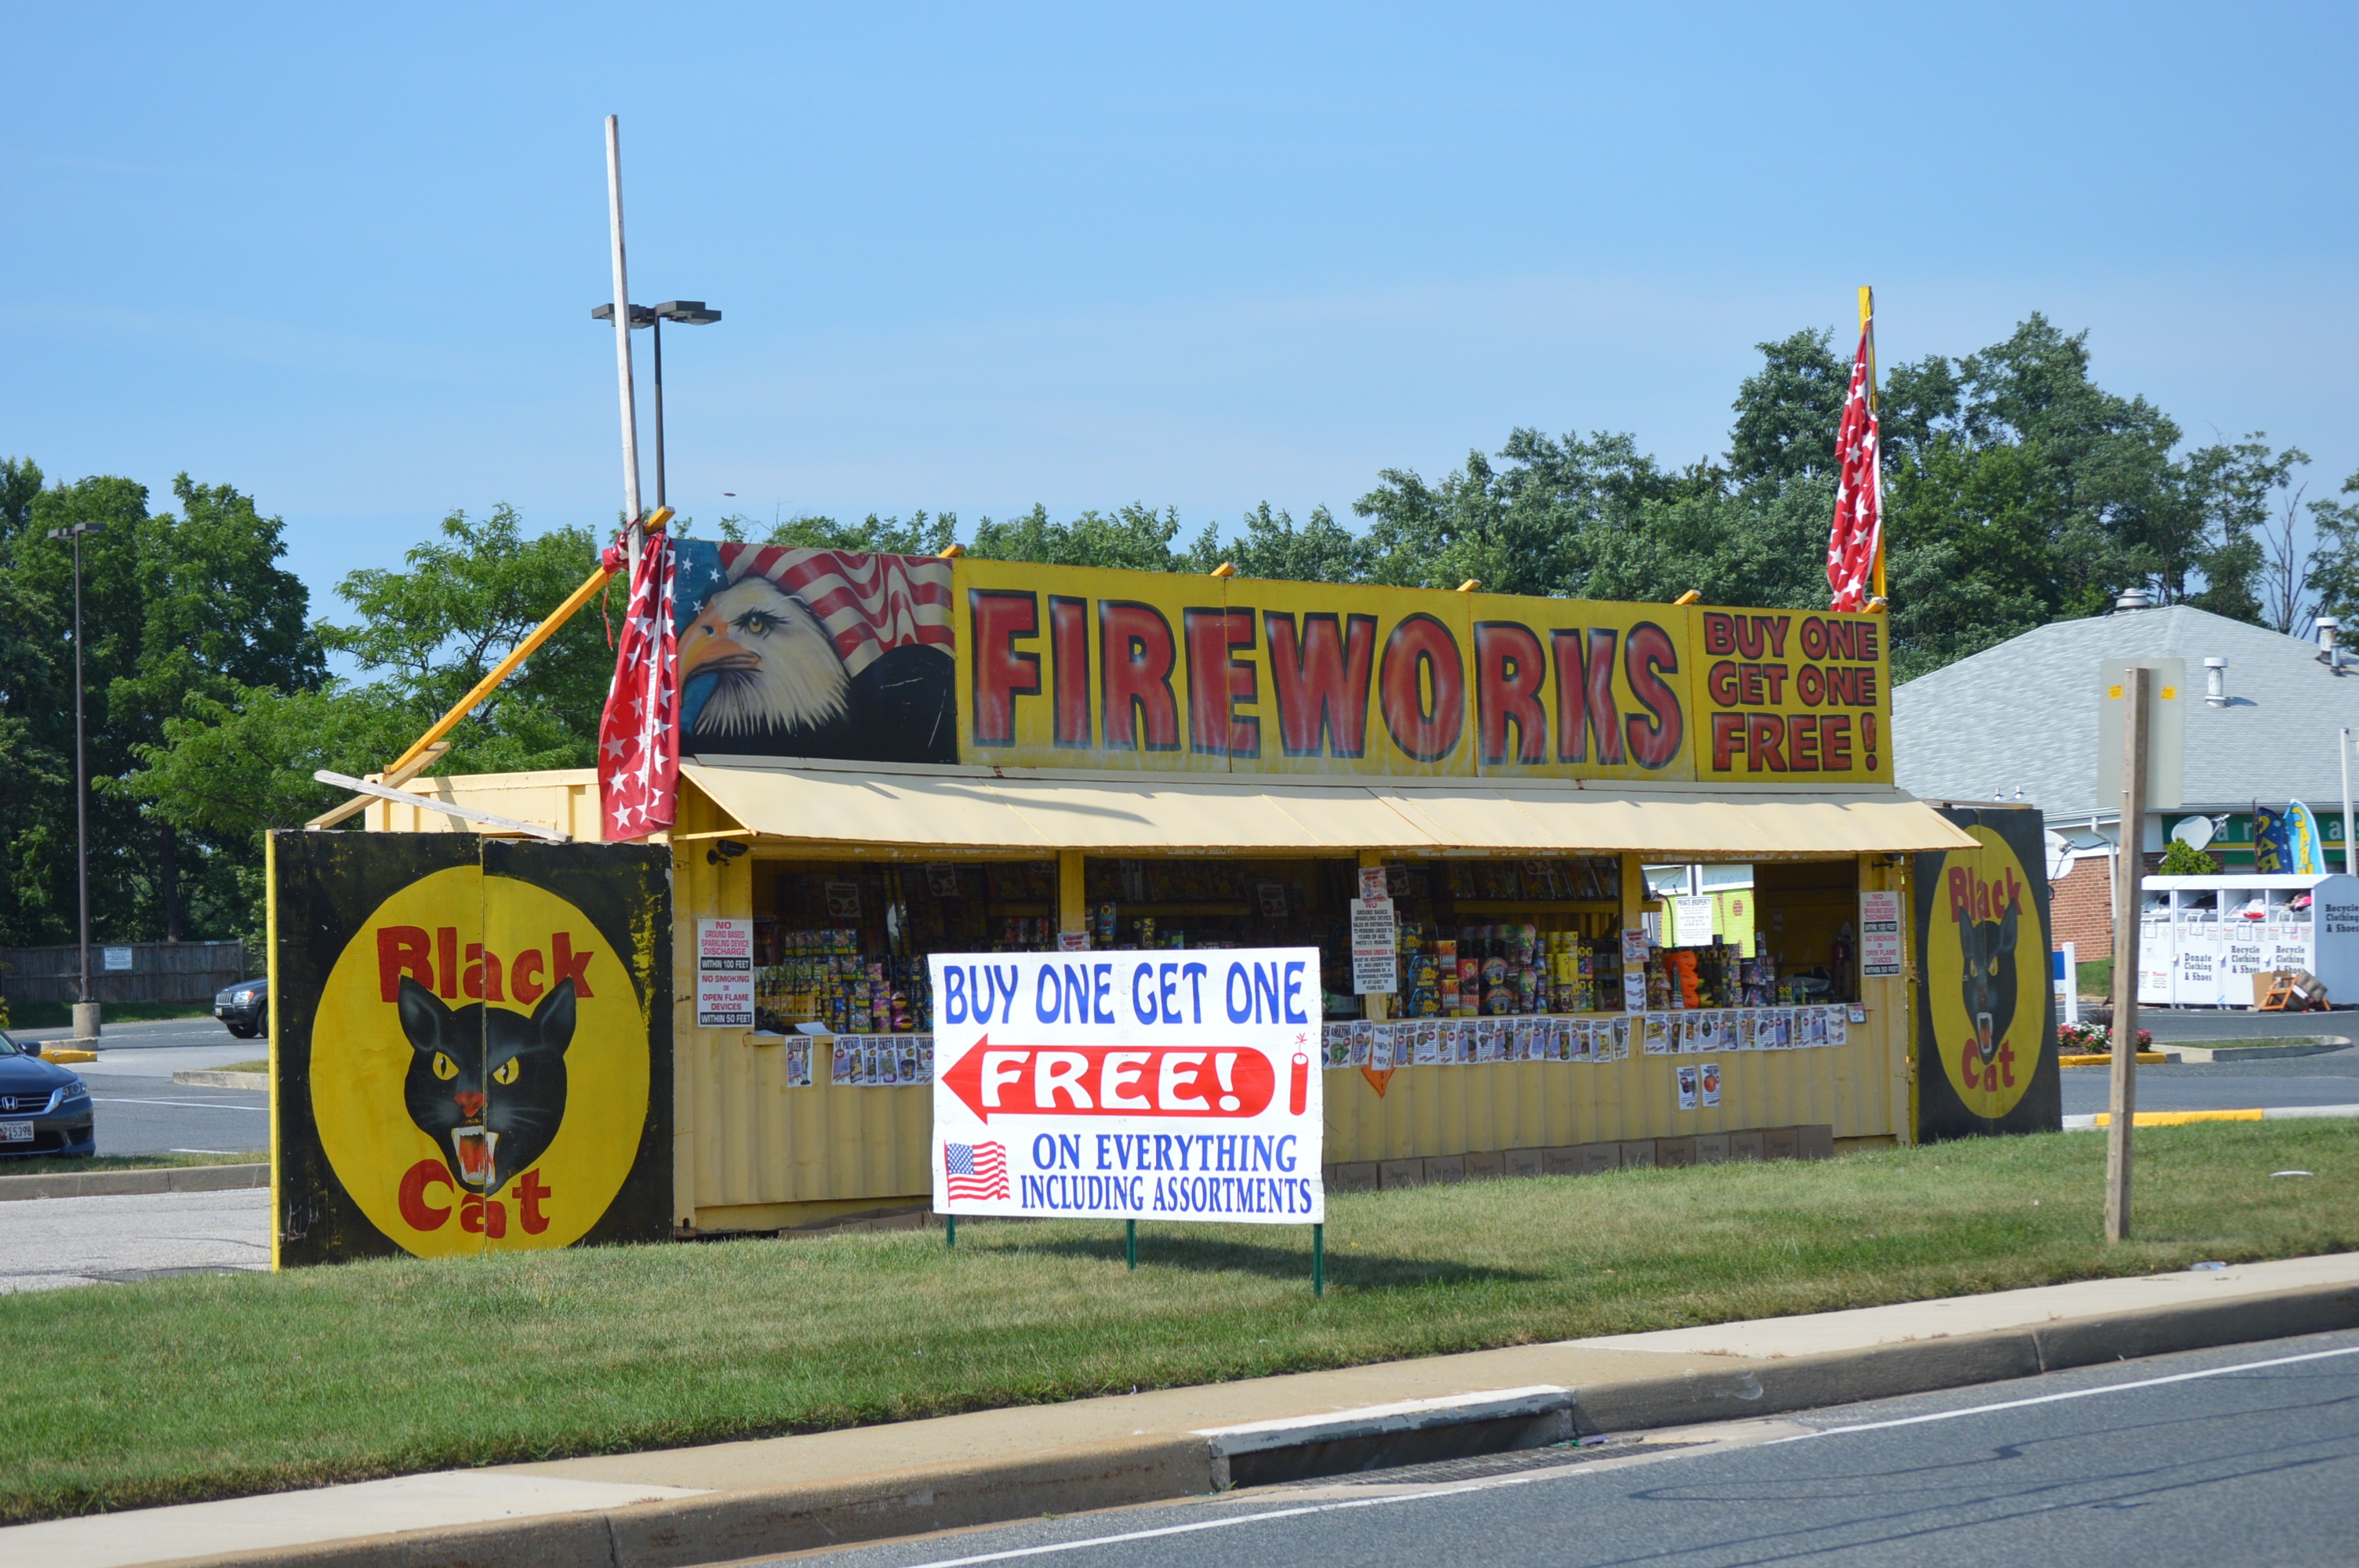 A 4th of July fireworks stand on Baltimore National Pike in Baltimore, Maryland. (credit Anthony C. Hayes)